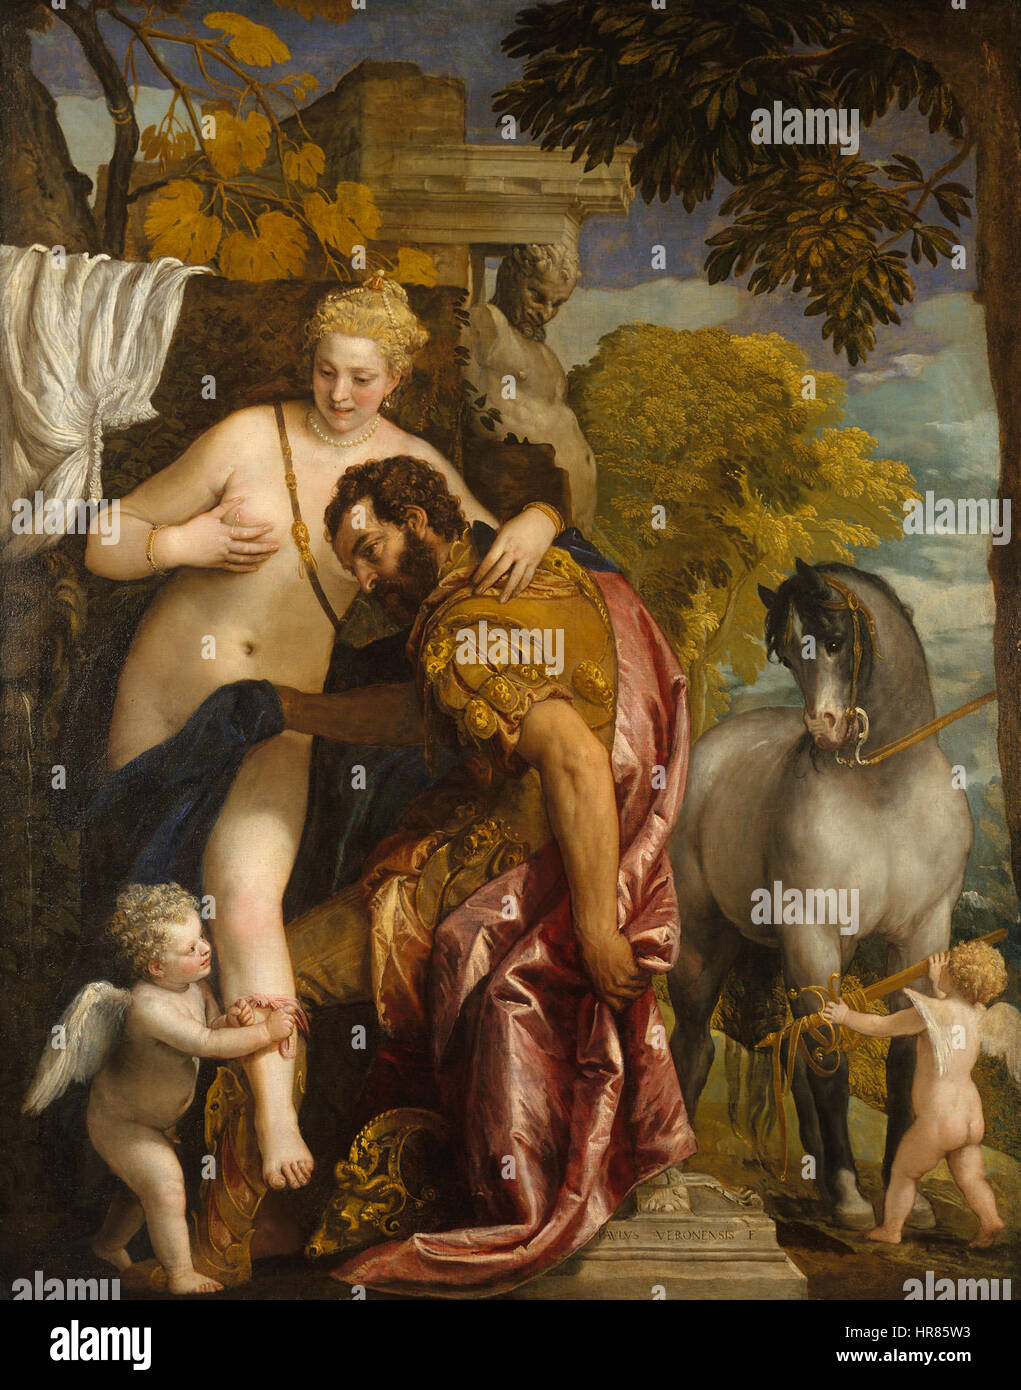 Veronese, Paolo - Mars and Venus United by Love - mid-1570s Stock Photo